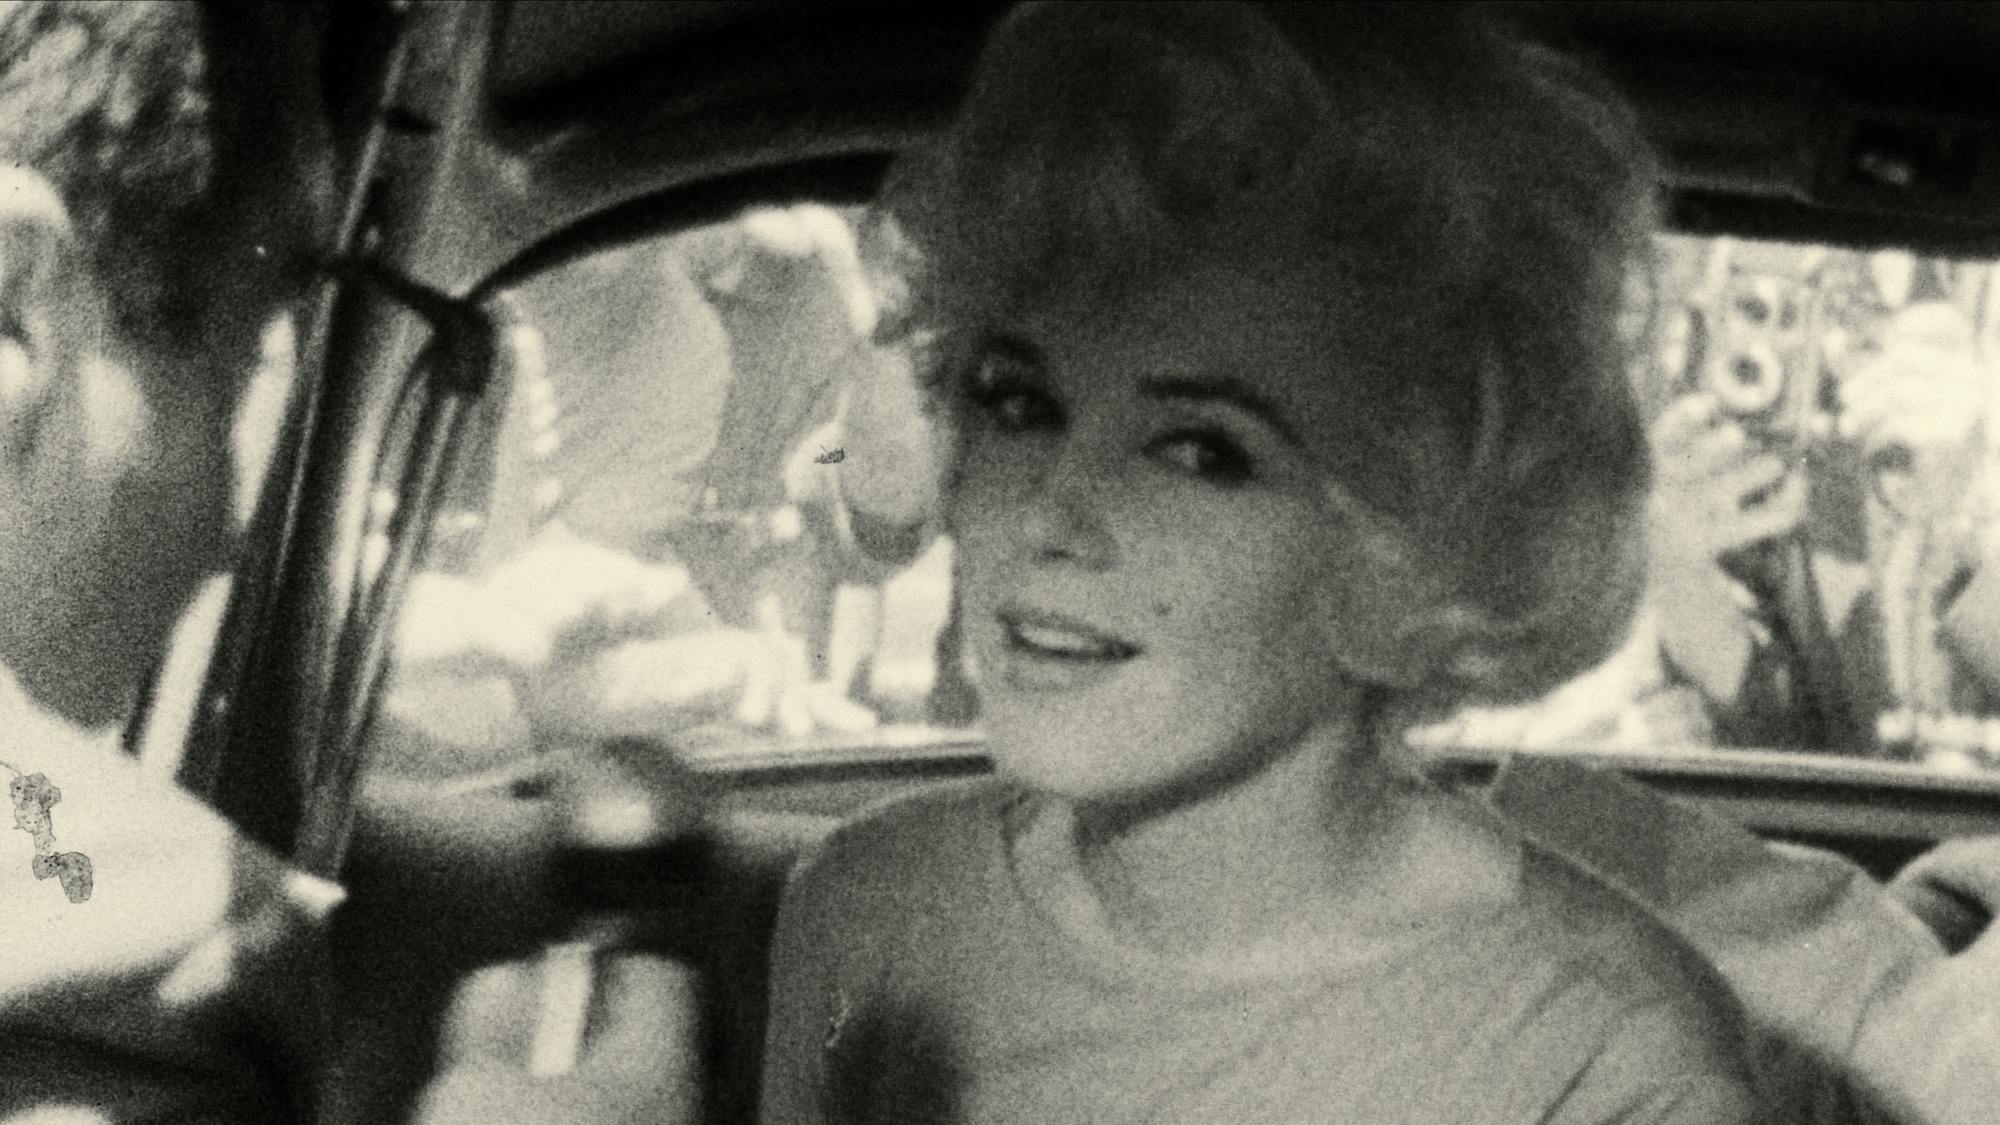 Marilyn Monroe wears a grey top in the back of a car. Through the windshield you can see crowds of people smushed together taking pictures.